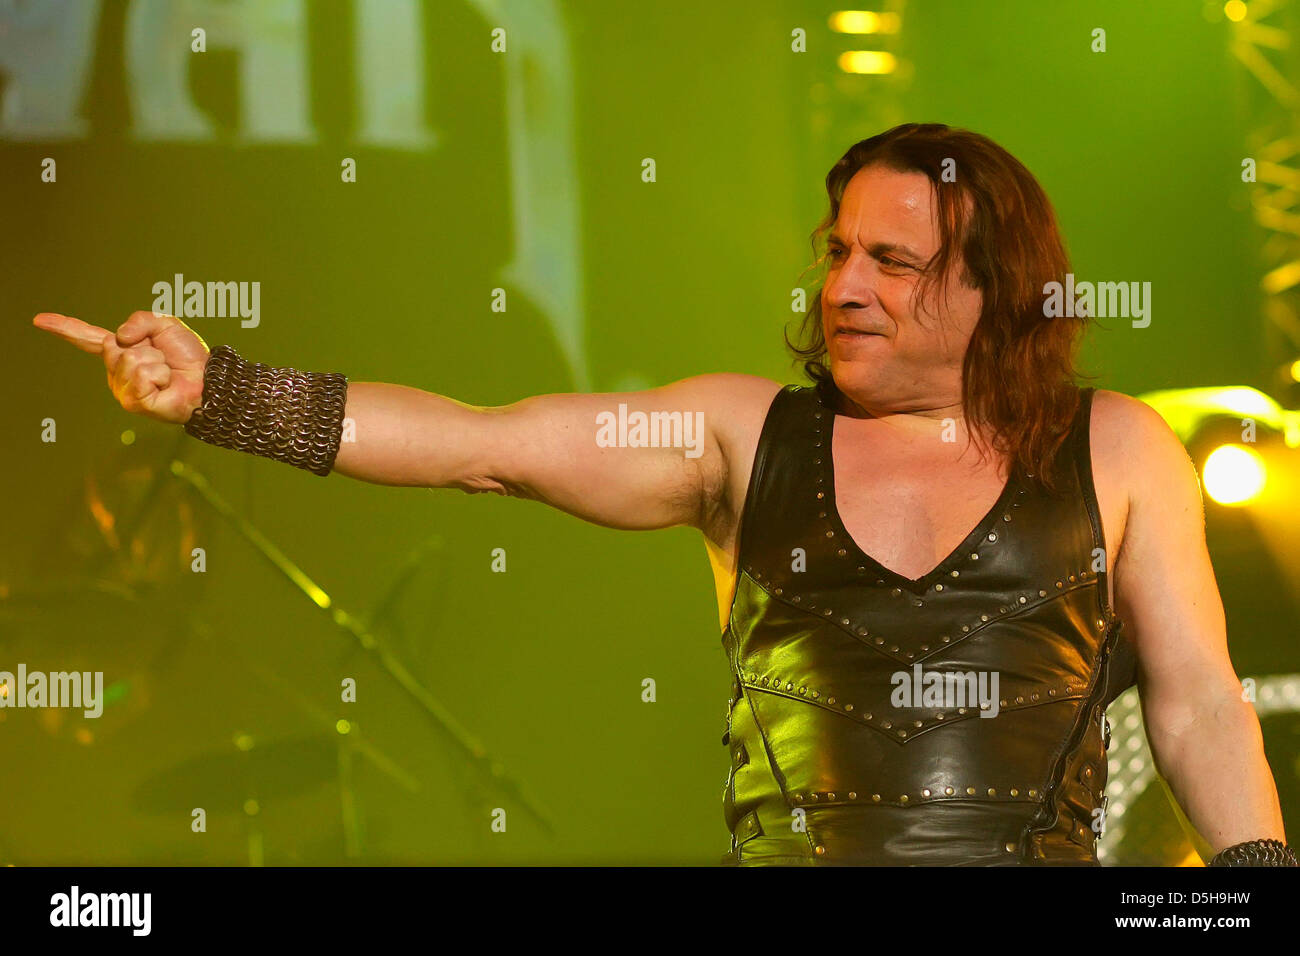 Eric Adams, lead singer of heavy metall band Manowar, sings during a  concert at the Death to Infidels World Tour 2010 in Cologne, Germany, 31  January 2010. Photo: Revierfoto Stock Photo - Alamy